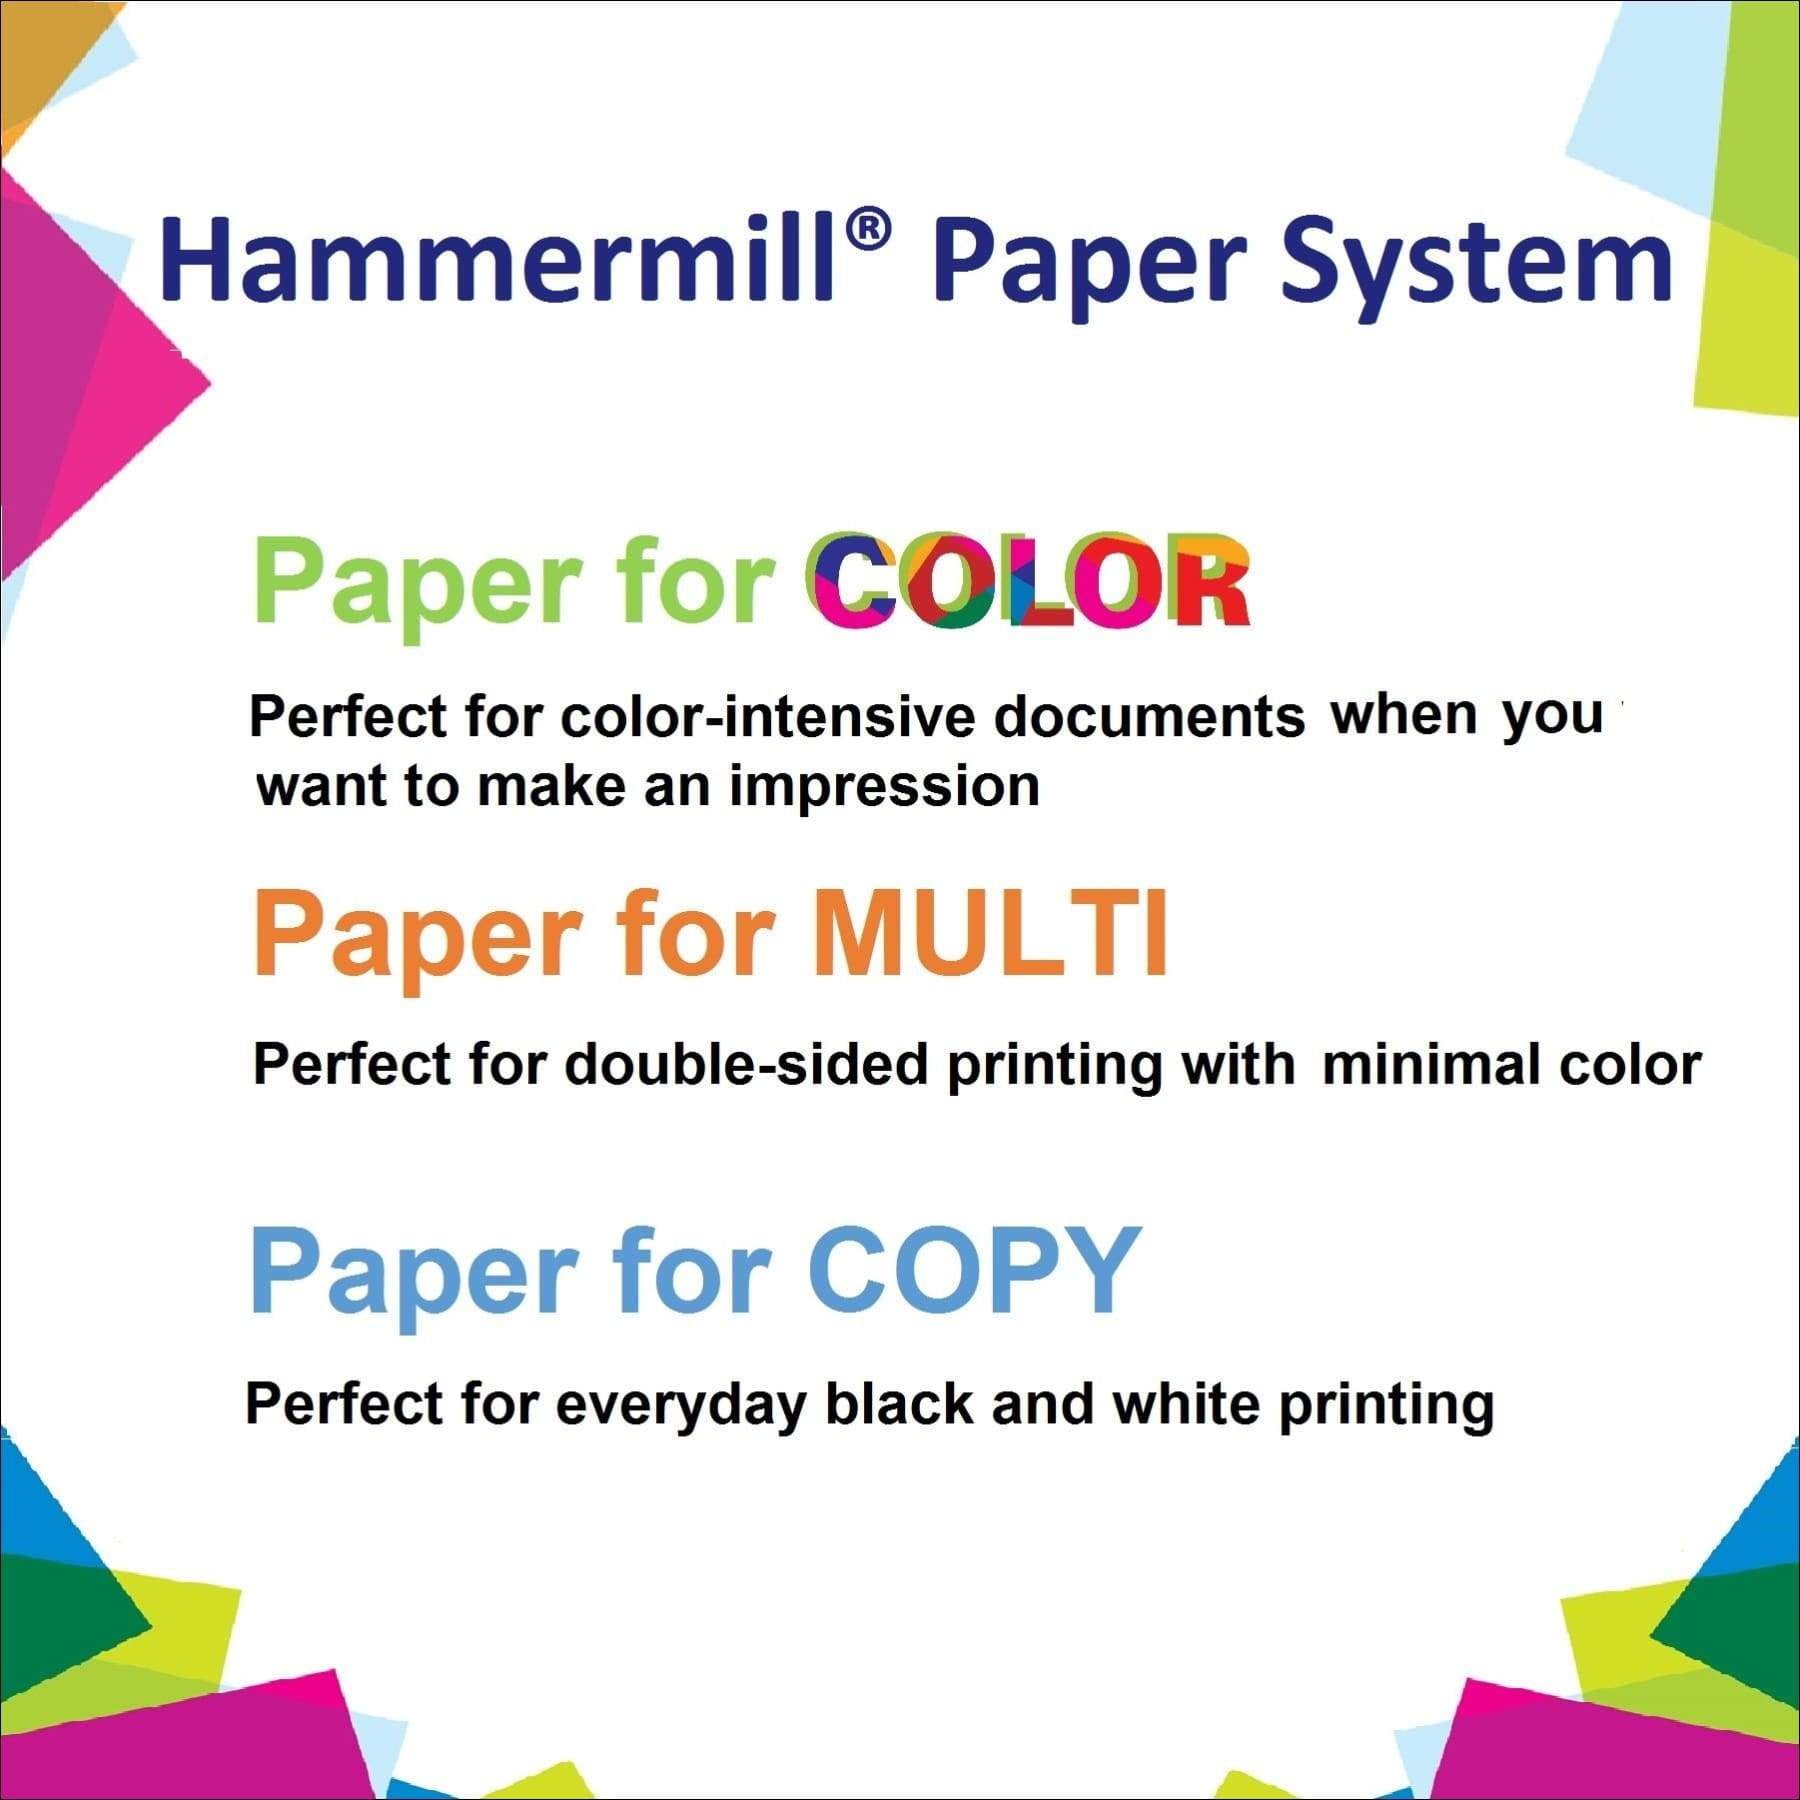  Hammermill Glossy Paper, Laser Gloss Copy Paper, 8.5 x 11 - 8  Pack (2,400 Sheets) - 94 Bright, Made in the USA Glossy Printer Paper,  163110C : Laser Printer Paper : Office Products